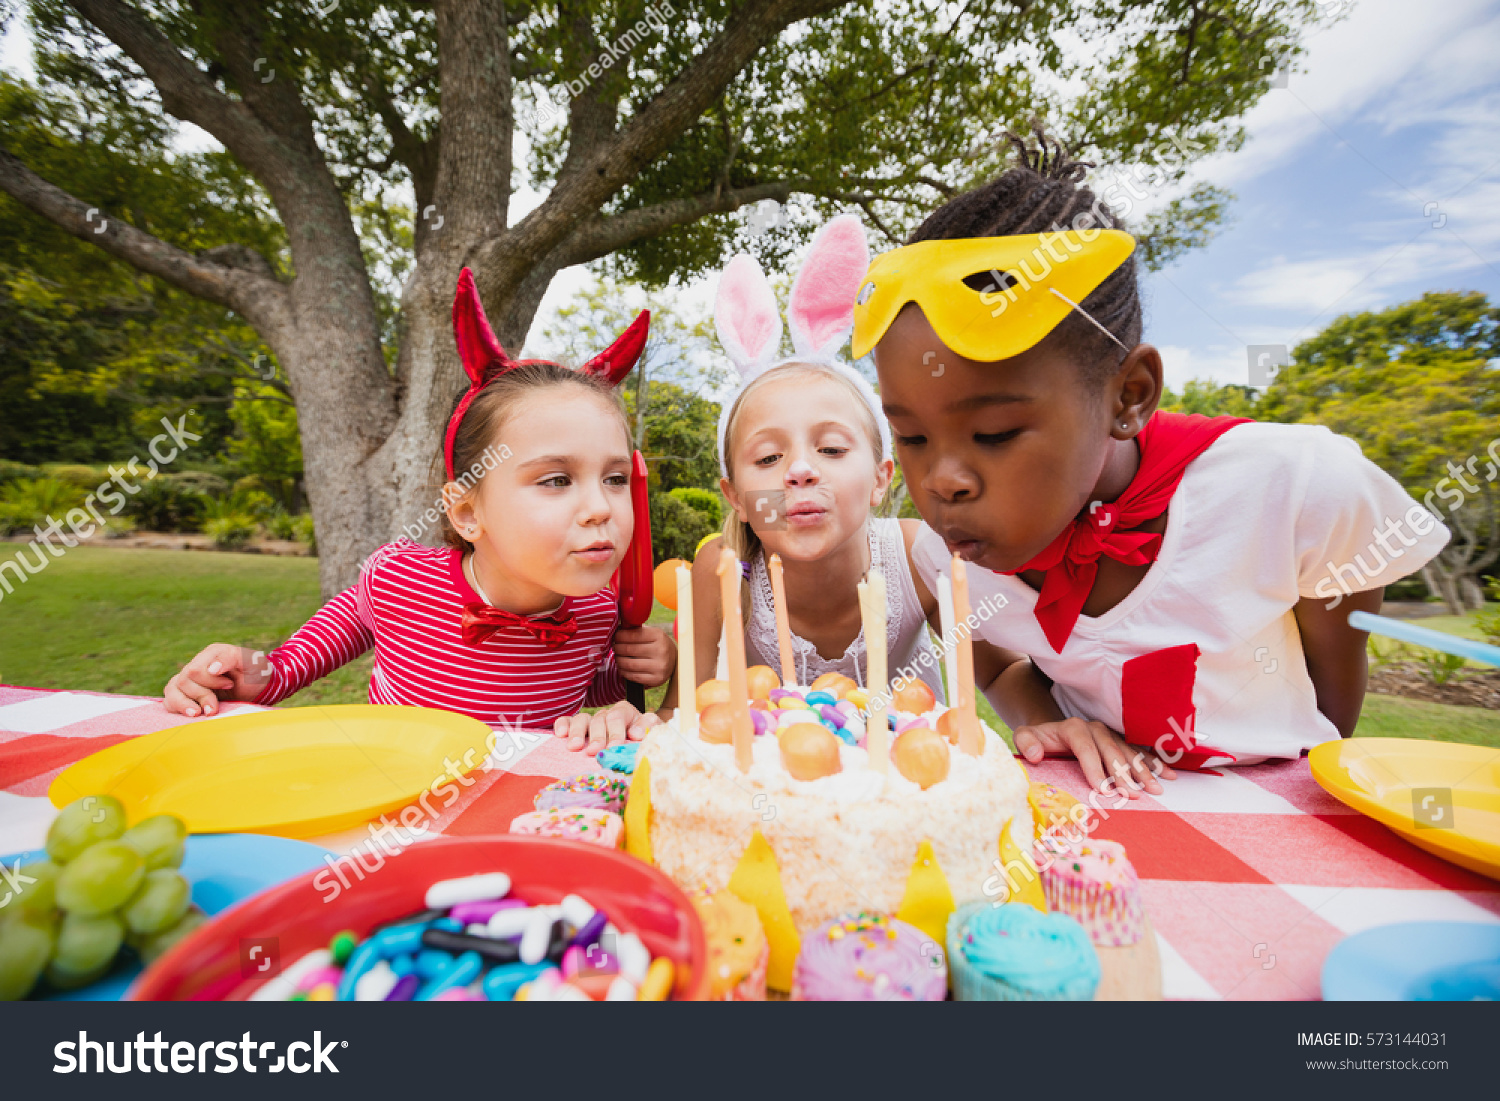 Three little girls blowing together birthday candles in the park #573144031